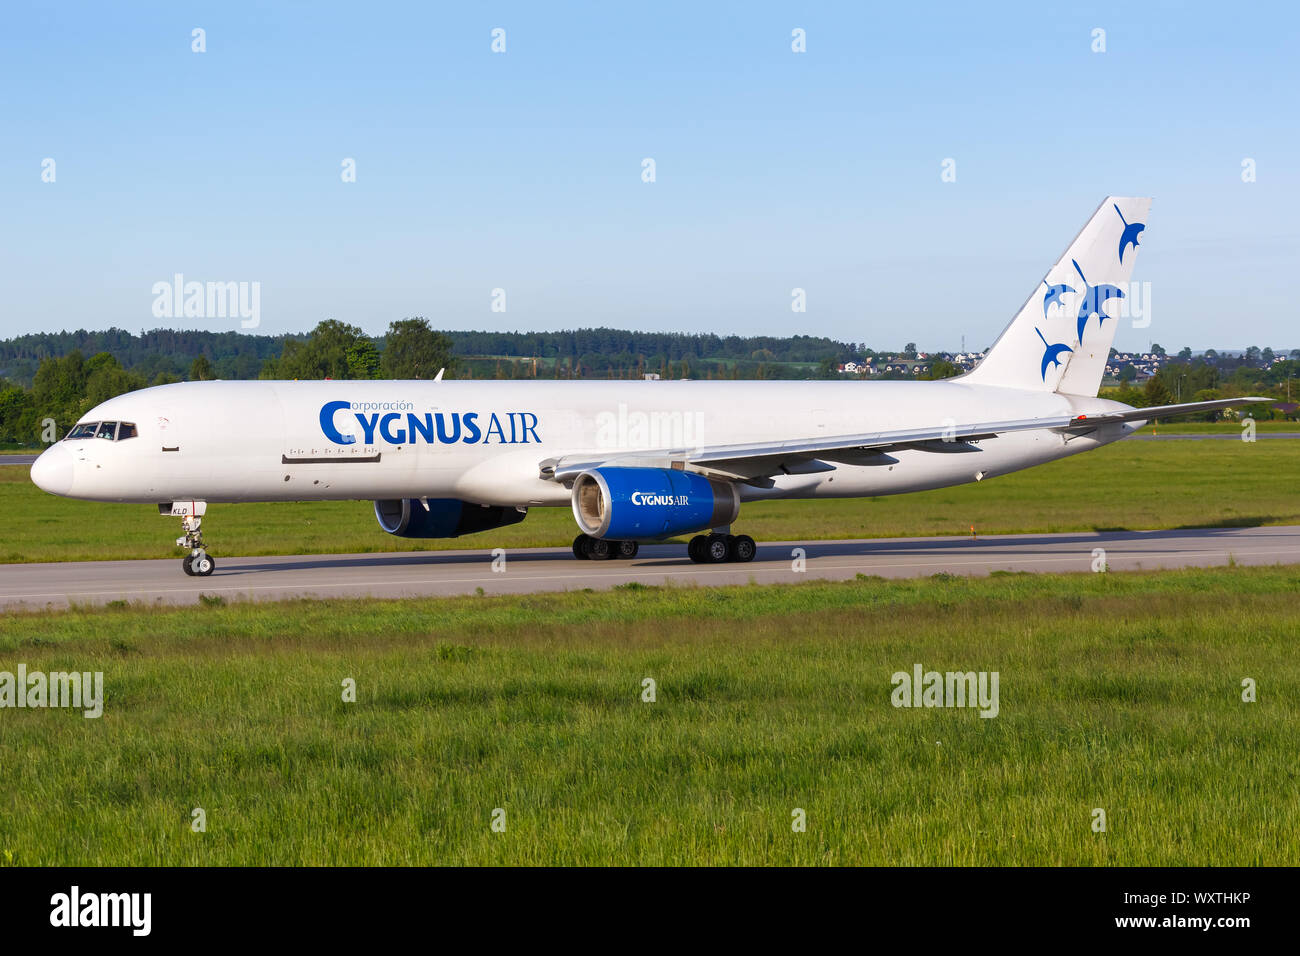 Gdansk, Poland – May 29, 2019: Cygnus Air Boeing 757-200SF airplane at Gdansk airport (GDN) in Poland. Stock Photo